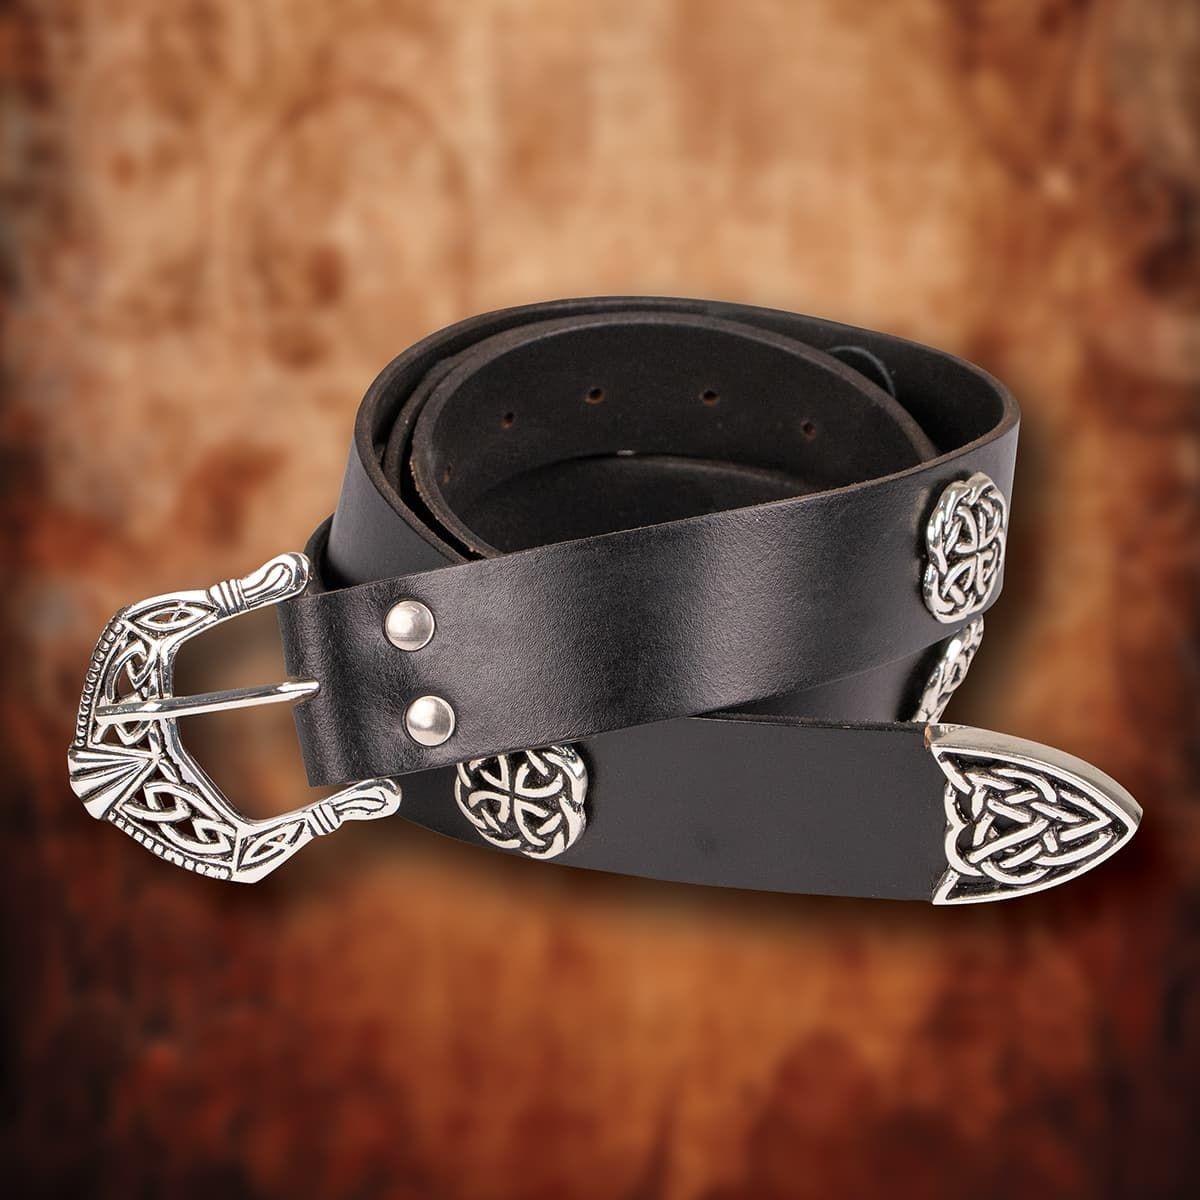 Overlord Black Leather Belt with Elaborate Silver Buckle 